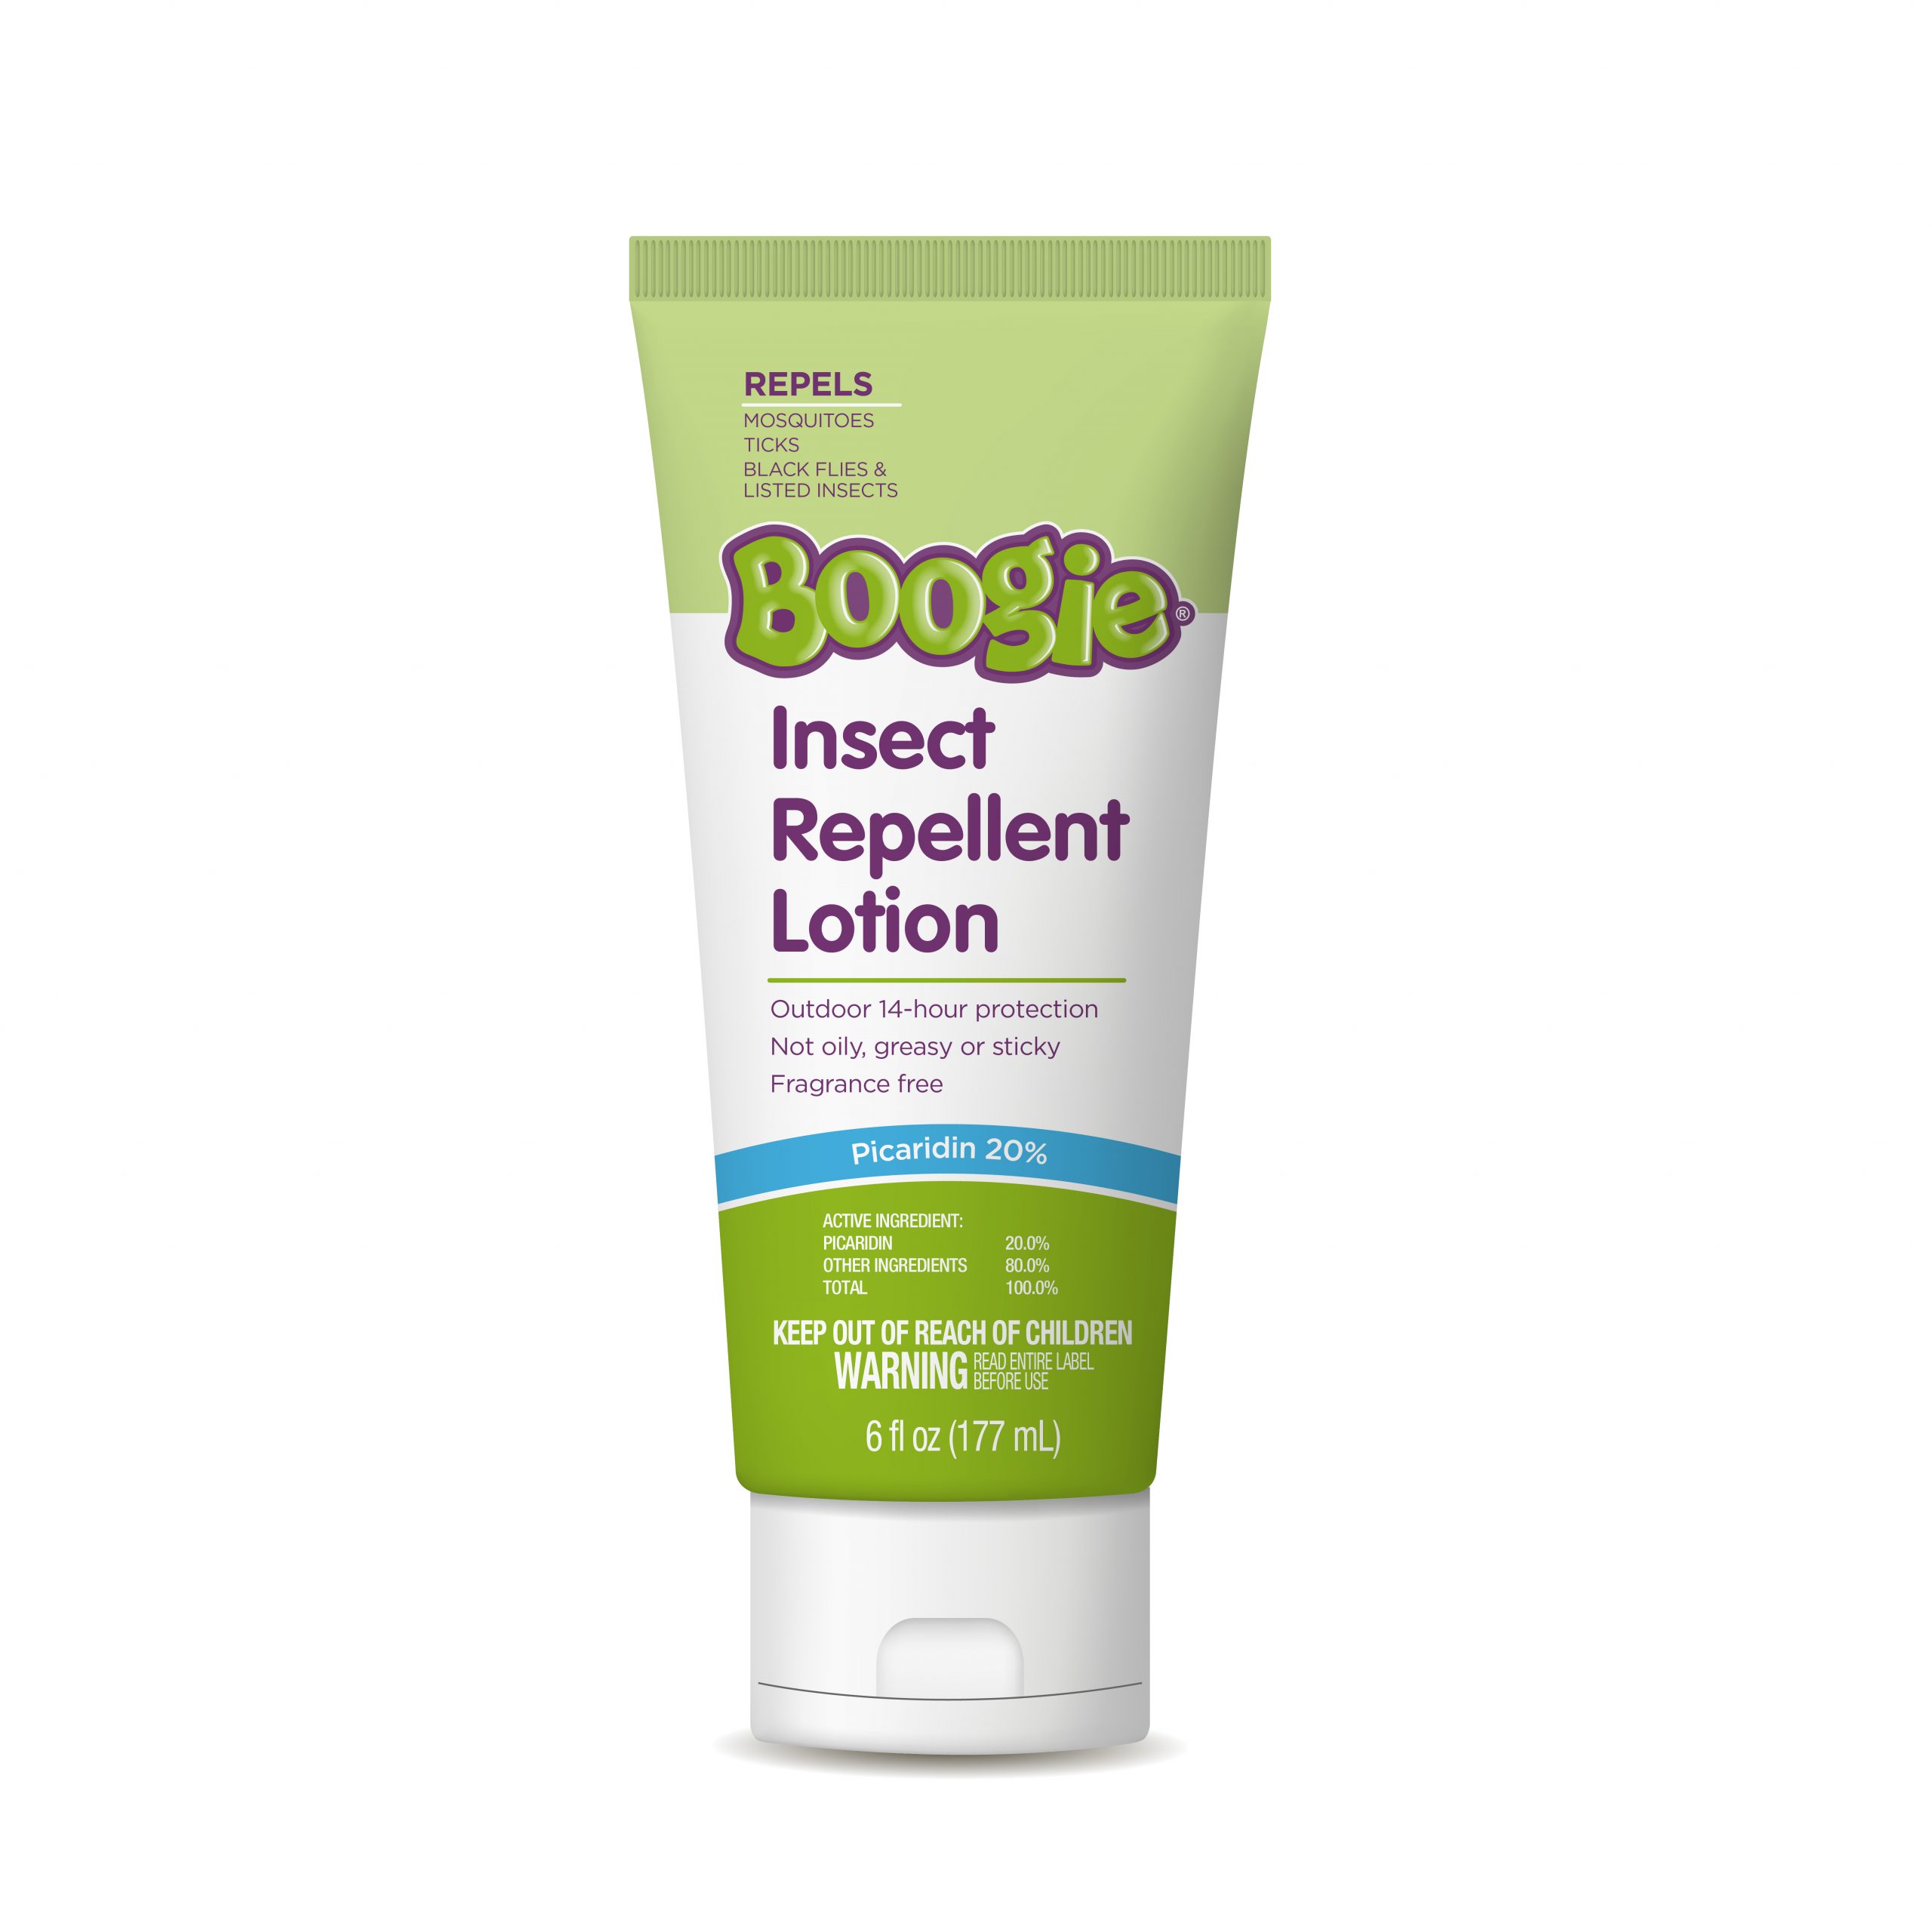 Boogie®, Insect Repellent Lotion